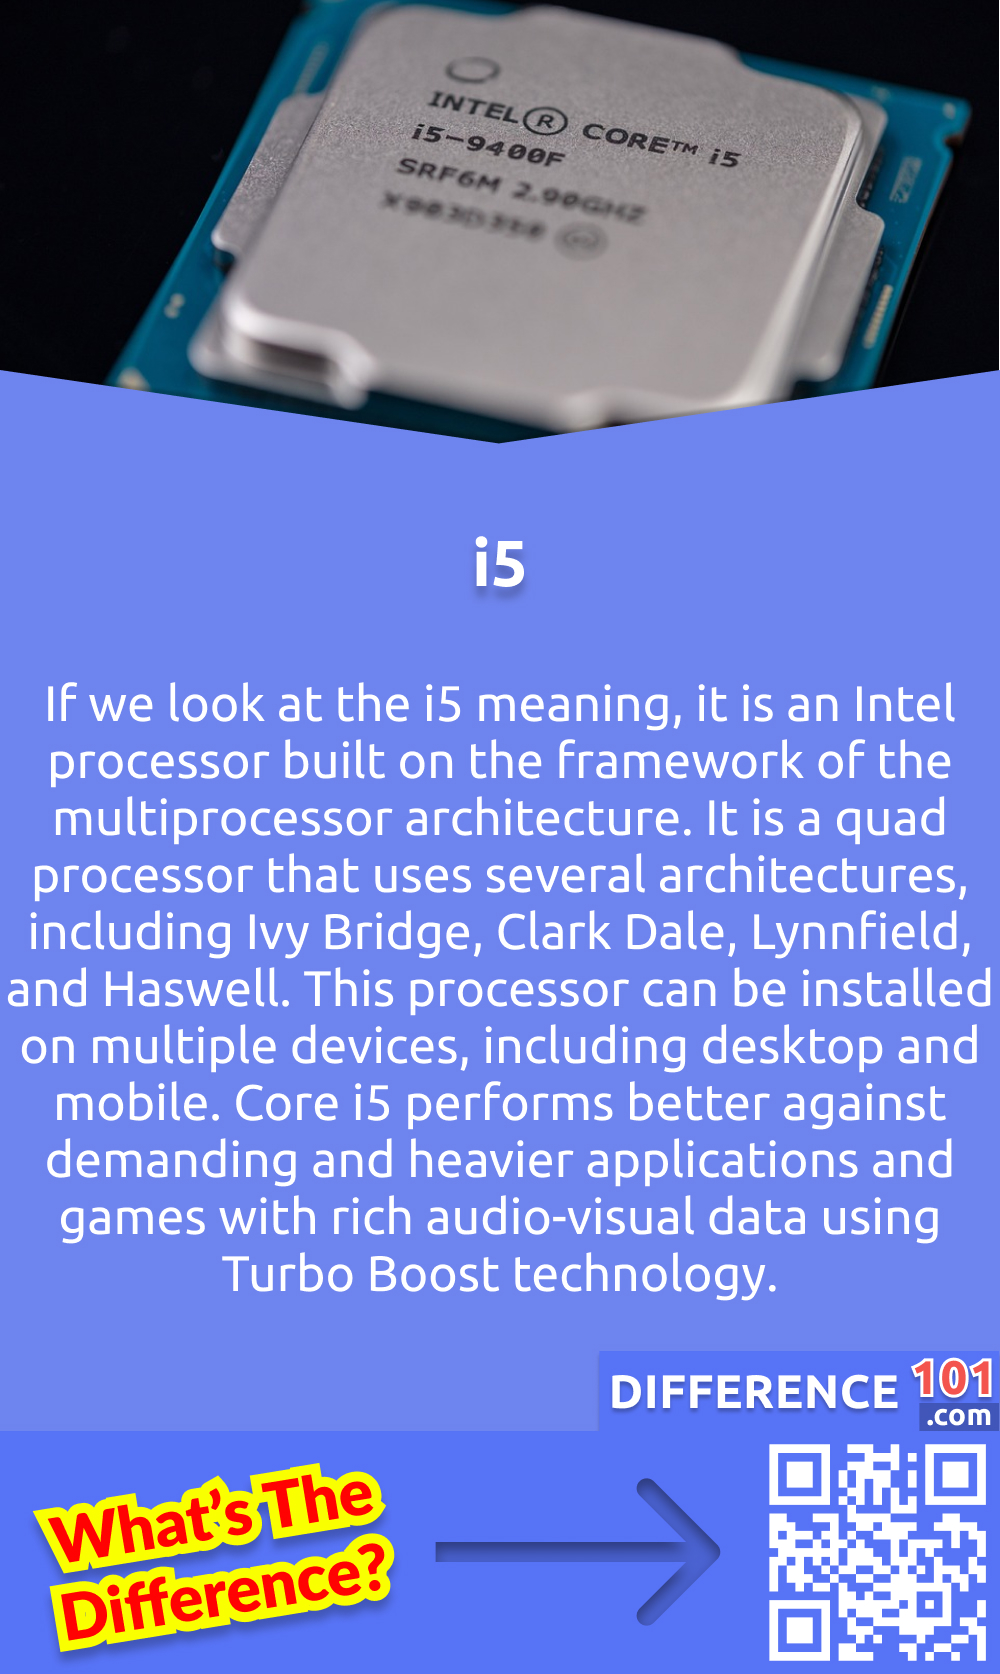 What Is i5? If we look at the i5 meaning, it is an Intel processor built on the framework of the multiprocessor architecture. It is a quad processor that uses several architectures, including Ivy Bridge, Clark Dale, Lynnfield, and Haswell. This processor can be installed on multiple devices, including desktop and mobile. Core i5 performs better against demanding and heavier applications and games with rich audio-visual data using Turbo Boost technology. Core i5 comes with two to four, which all support the four different threads. The clock speed of this processor is from 1.50 GHZ to 3.10 GHz, with memory from 3 to 6 MB. And the thermal design power can be from 15 TDP to 84 TDP. Most of the latest generations of the core i5 support the error correction code and intel platform and memory protection, just like core i3.